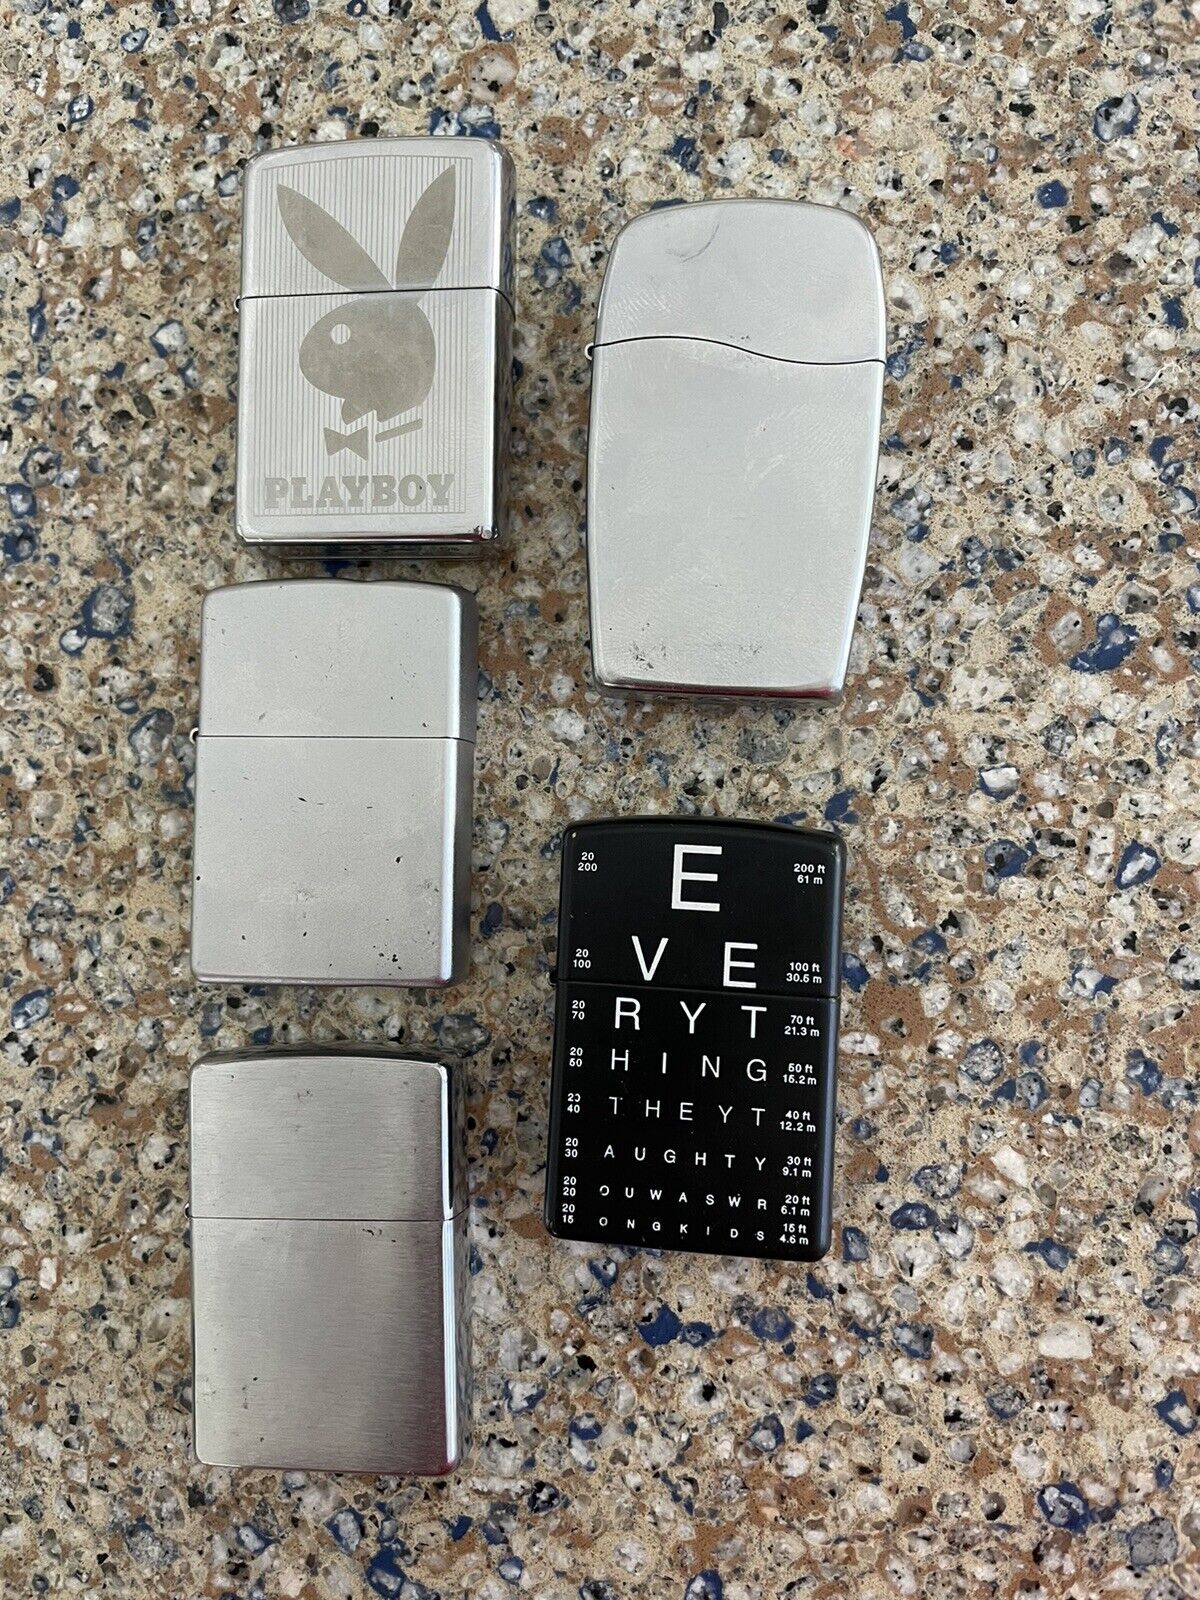 Vintage Zippo Lighters Made In U.S.A - Lot Of 5 Playboy Eye Test Brushed BLU